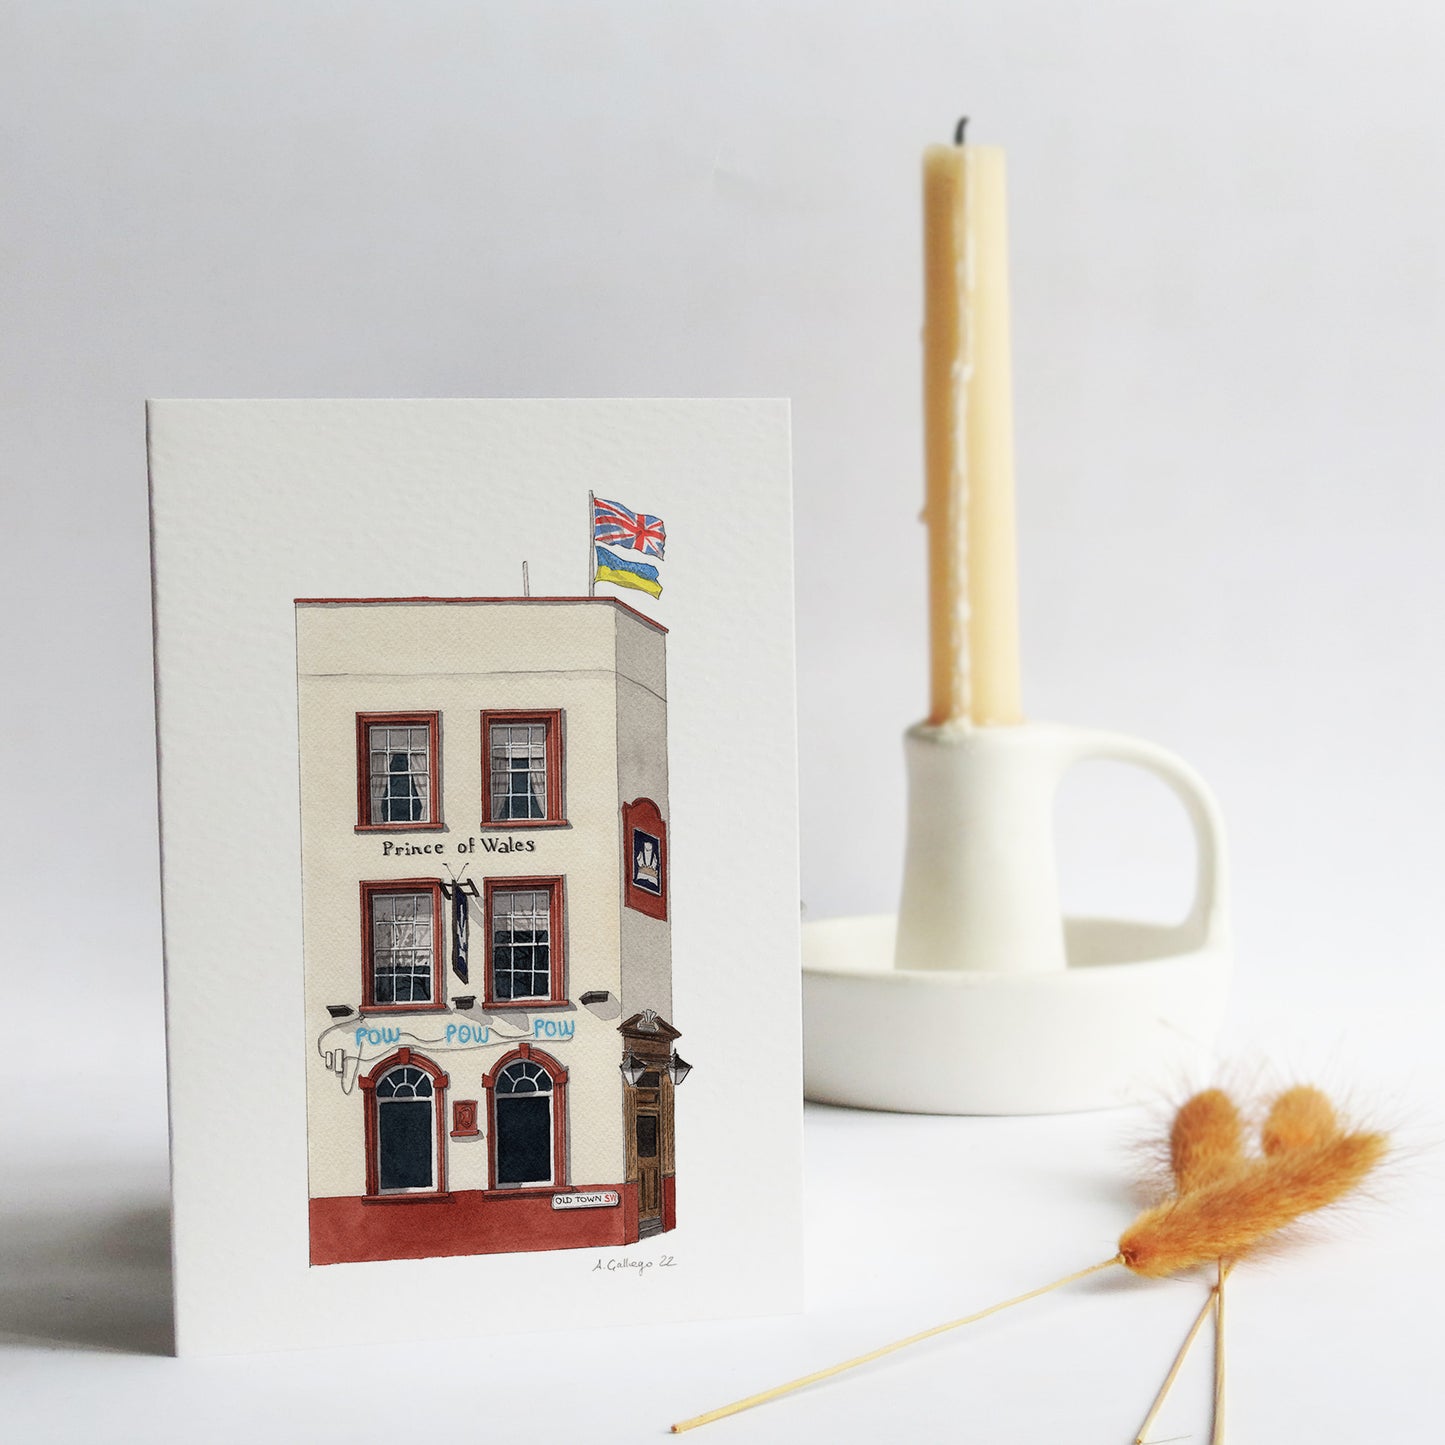 Clapham - Prince of Wales pub POW - Greeting card with envelope